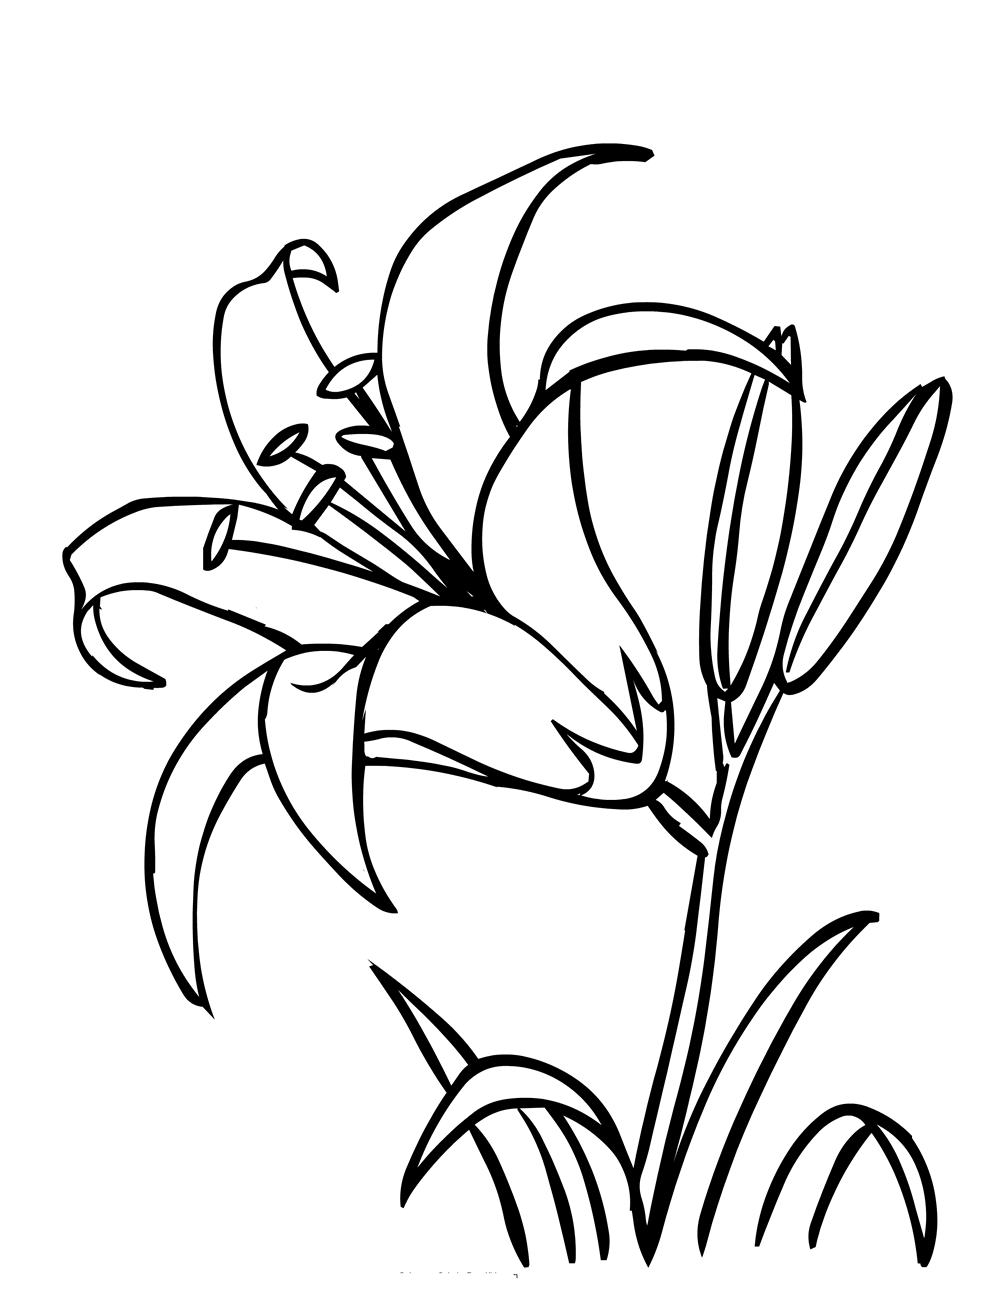 Coloring lilies for kids